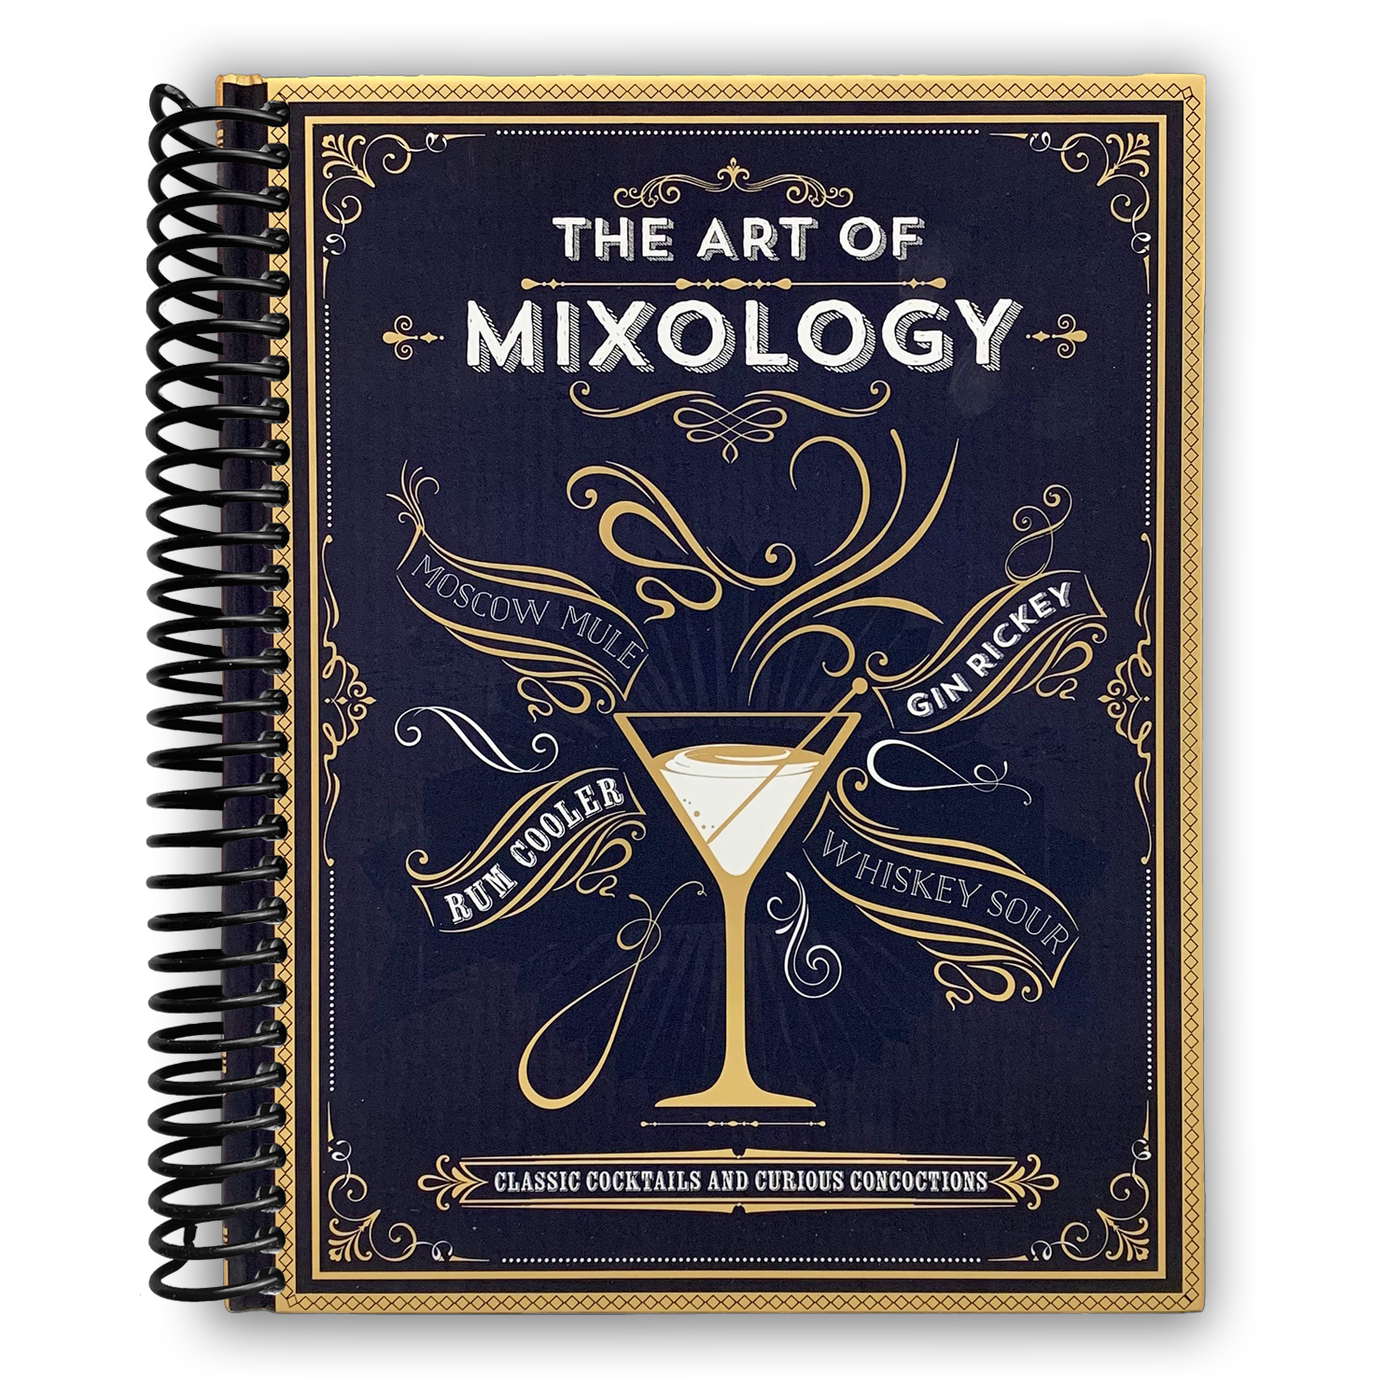 The Art of Mixology: Classic Cocktails and Curious Concoctions (Spiral Bound)